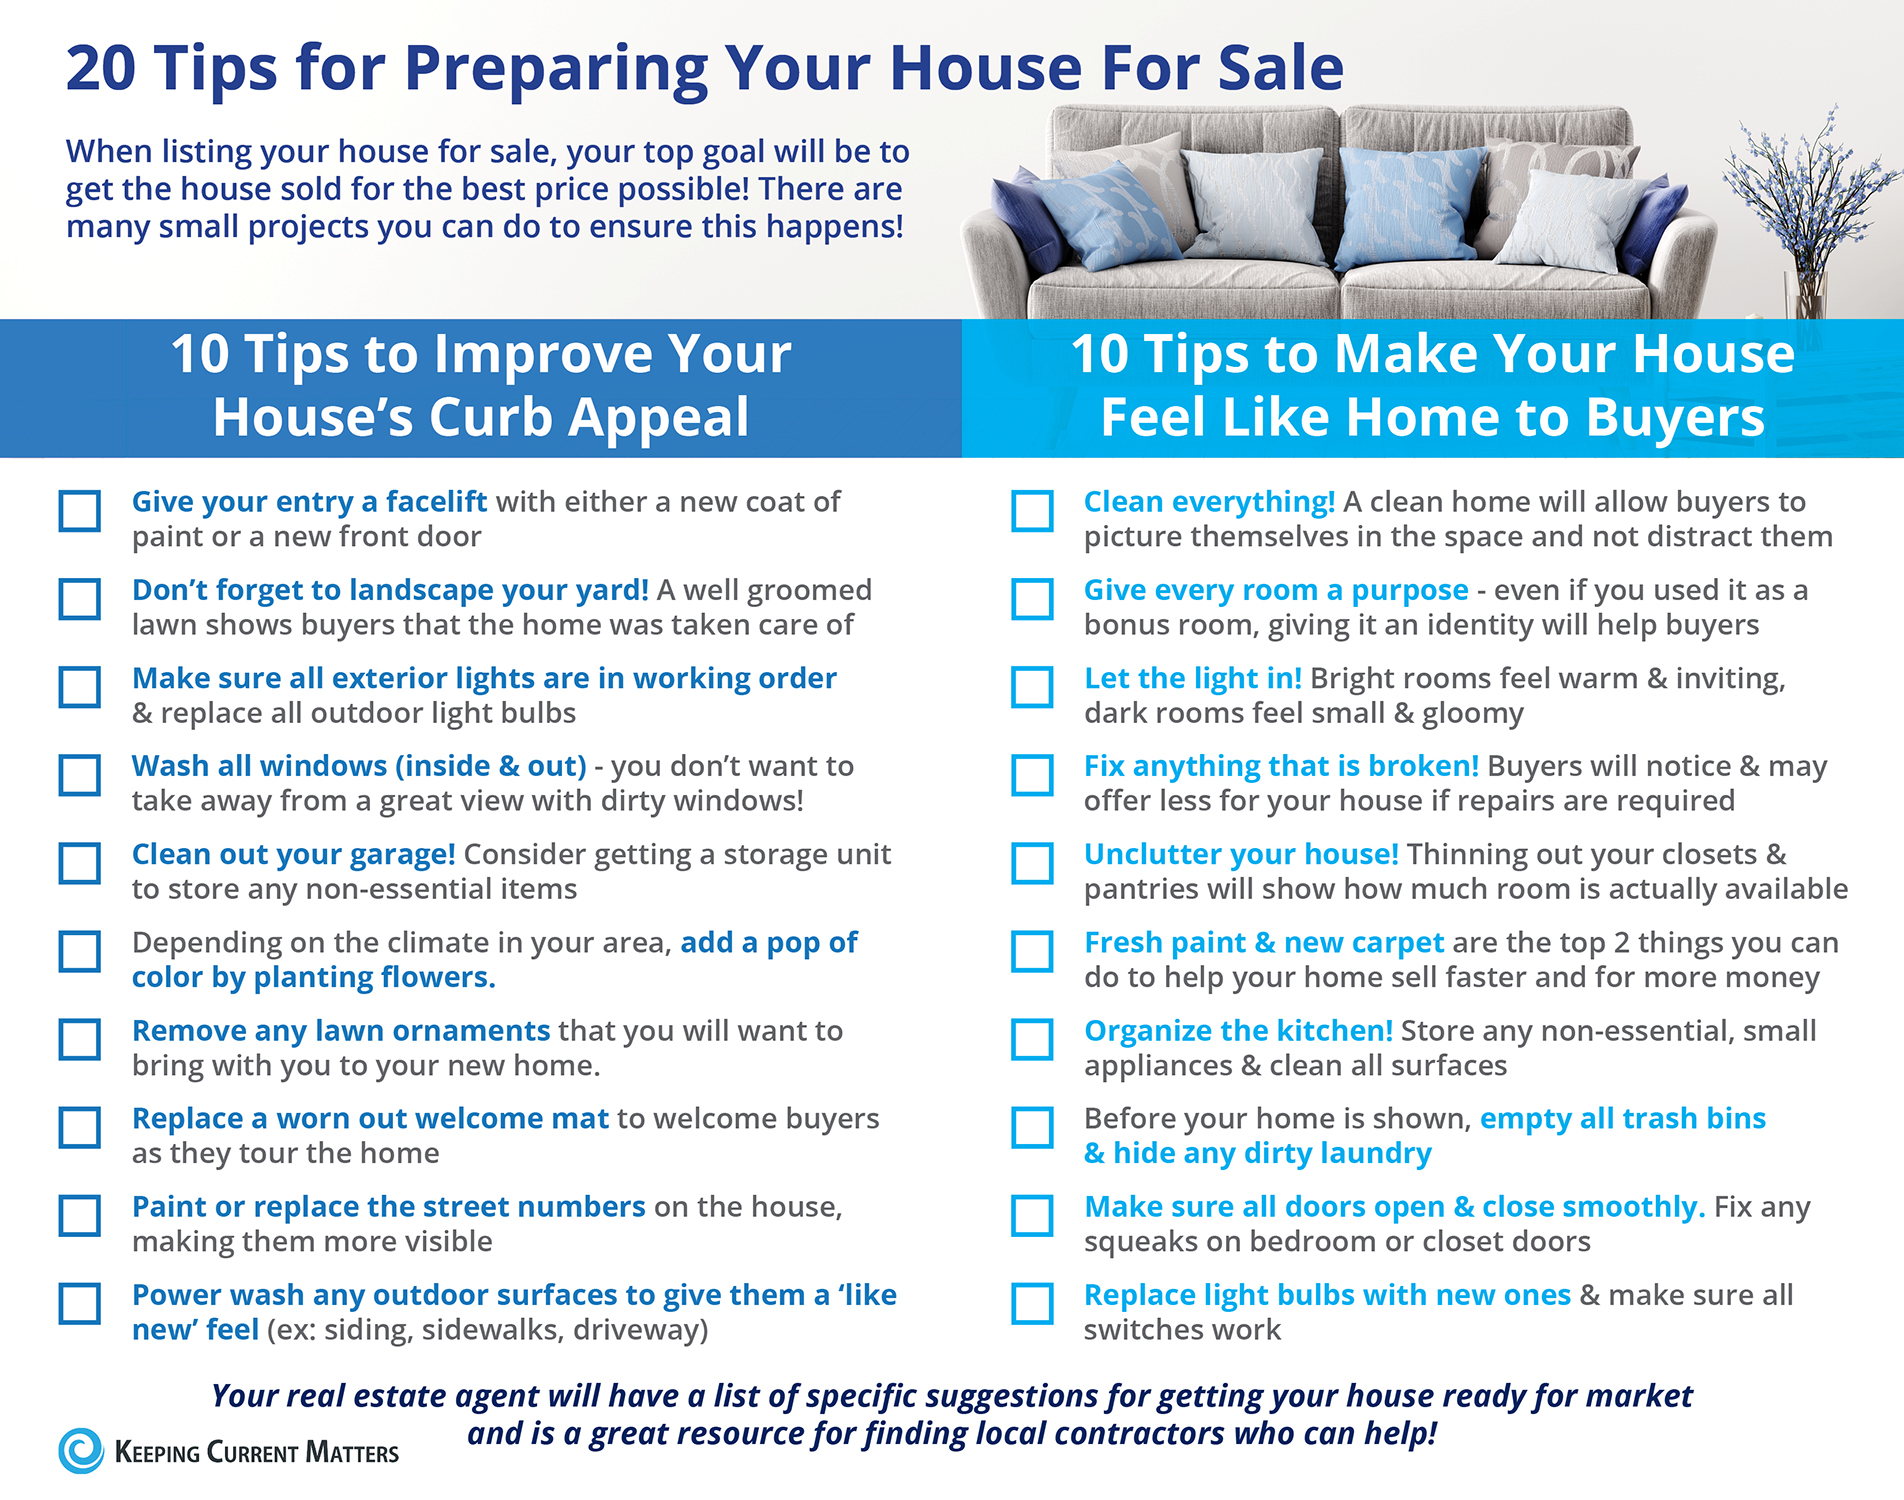 20 Tips for Preparing Your House for Sale This Spring [INFOGRAPHIC] | Keeping Current Matters